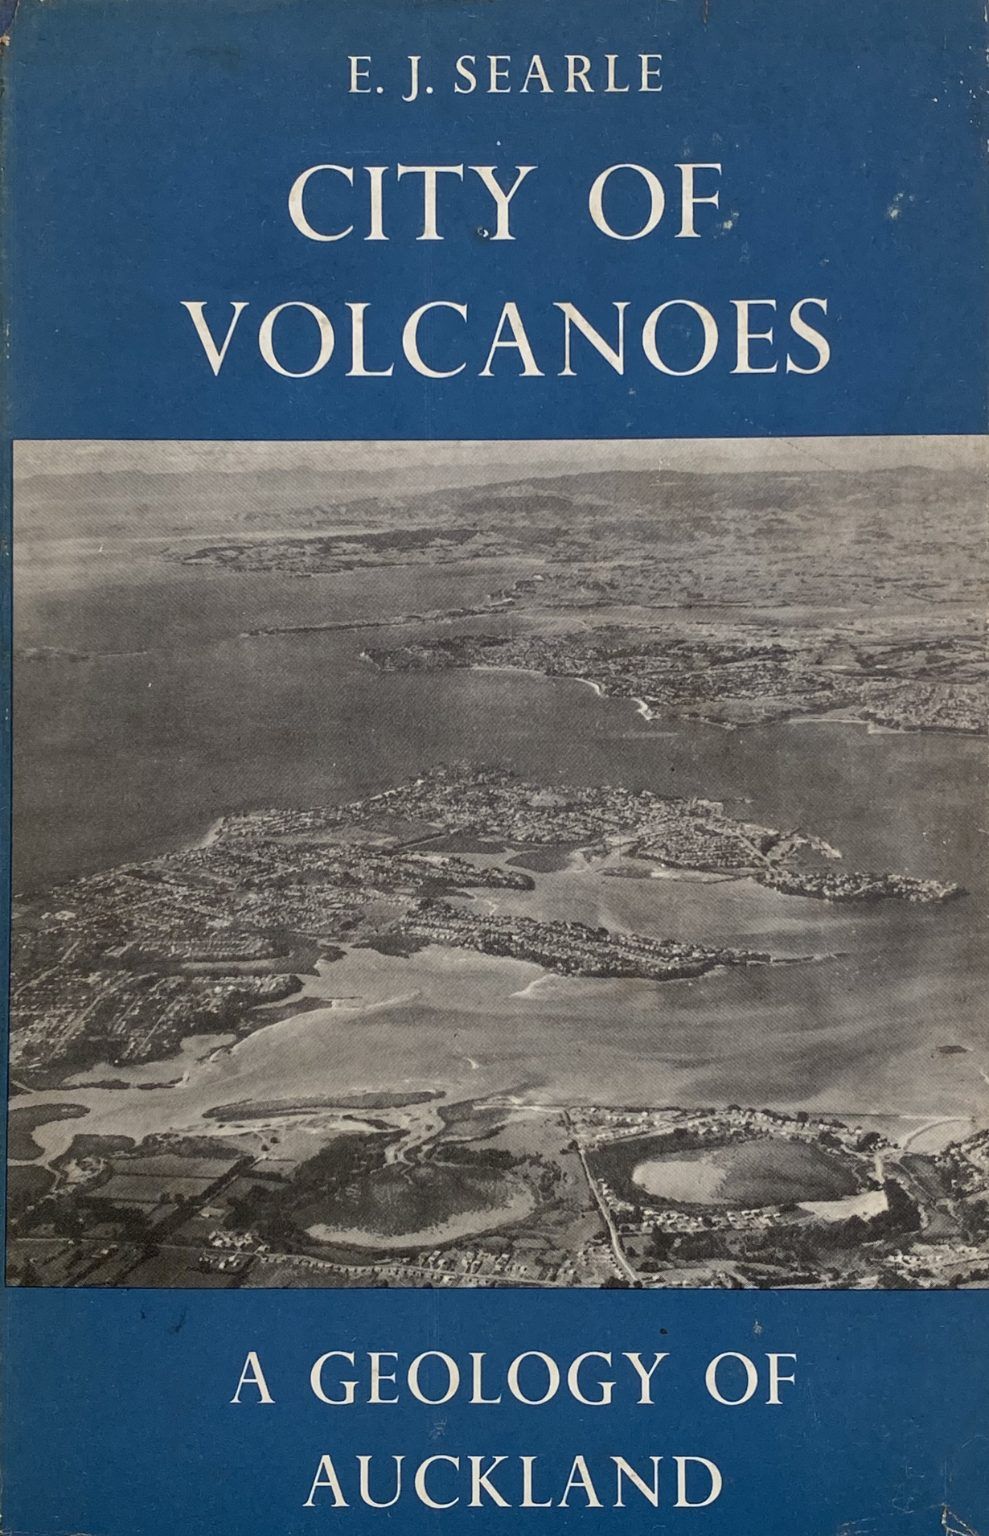 CITY OF VOLCANOES: A Geology of Auckland